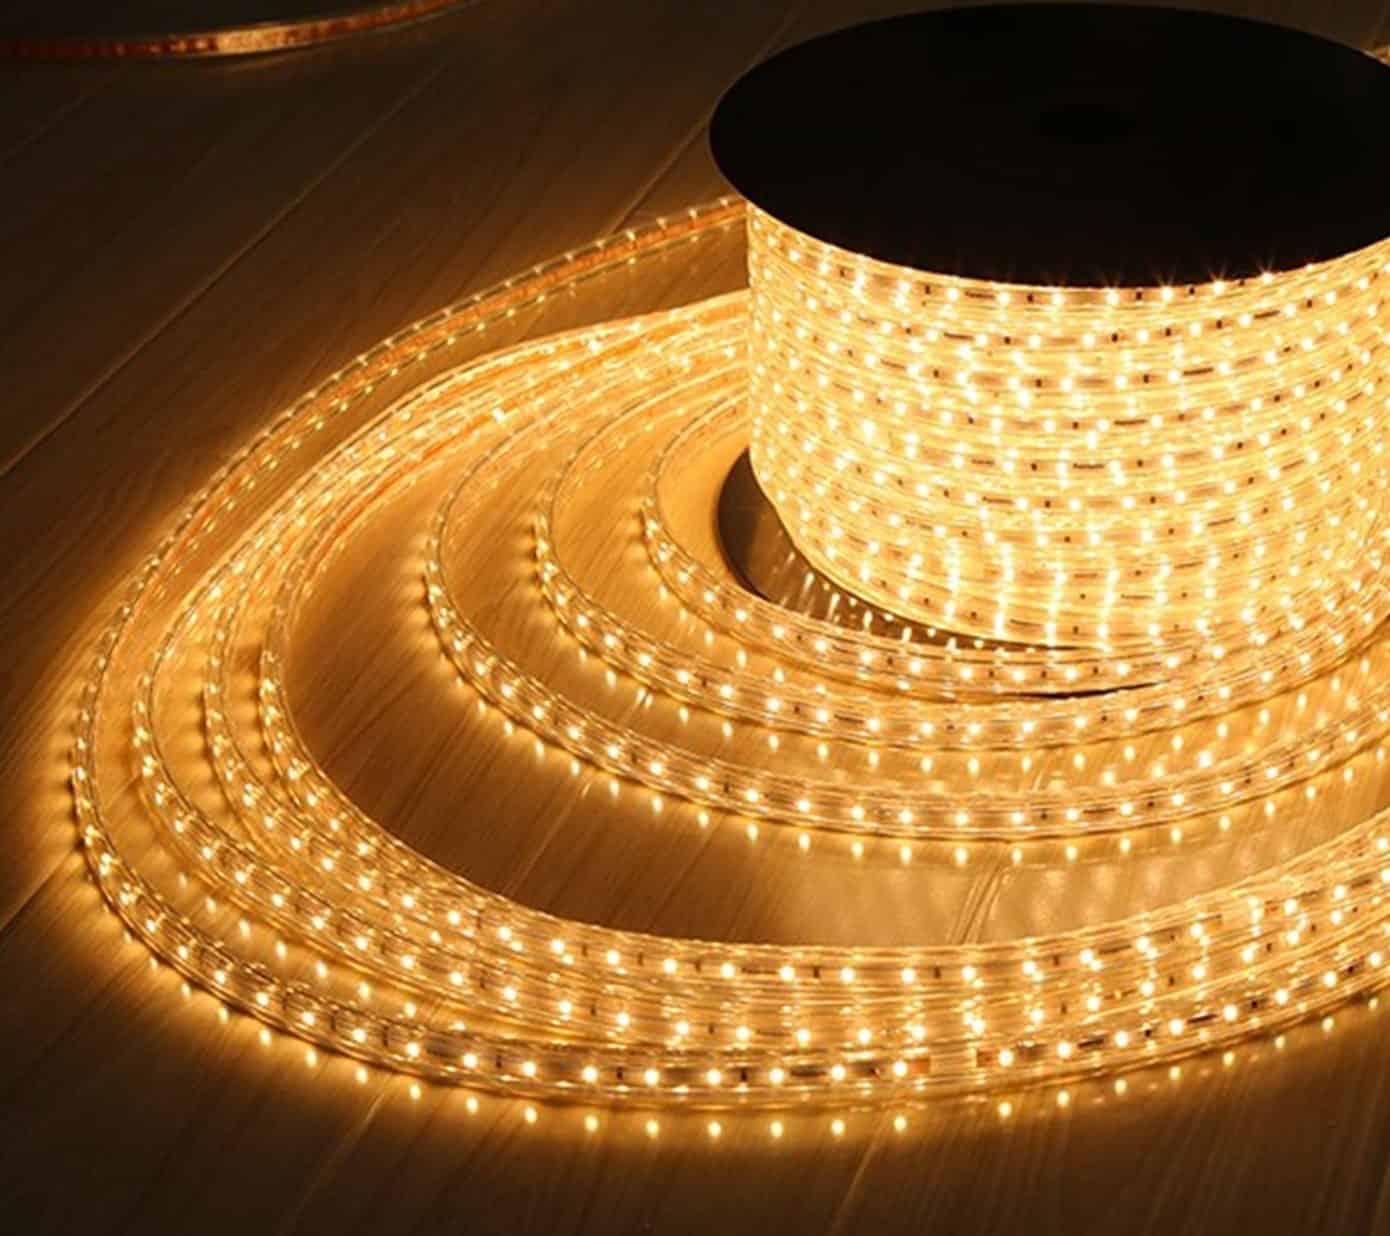 A roll of LED strip rope lighting.